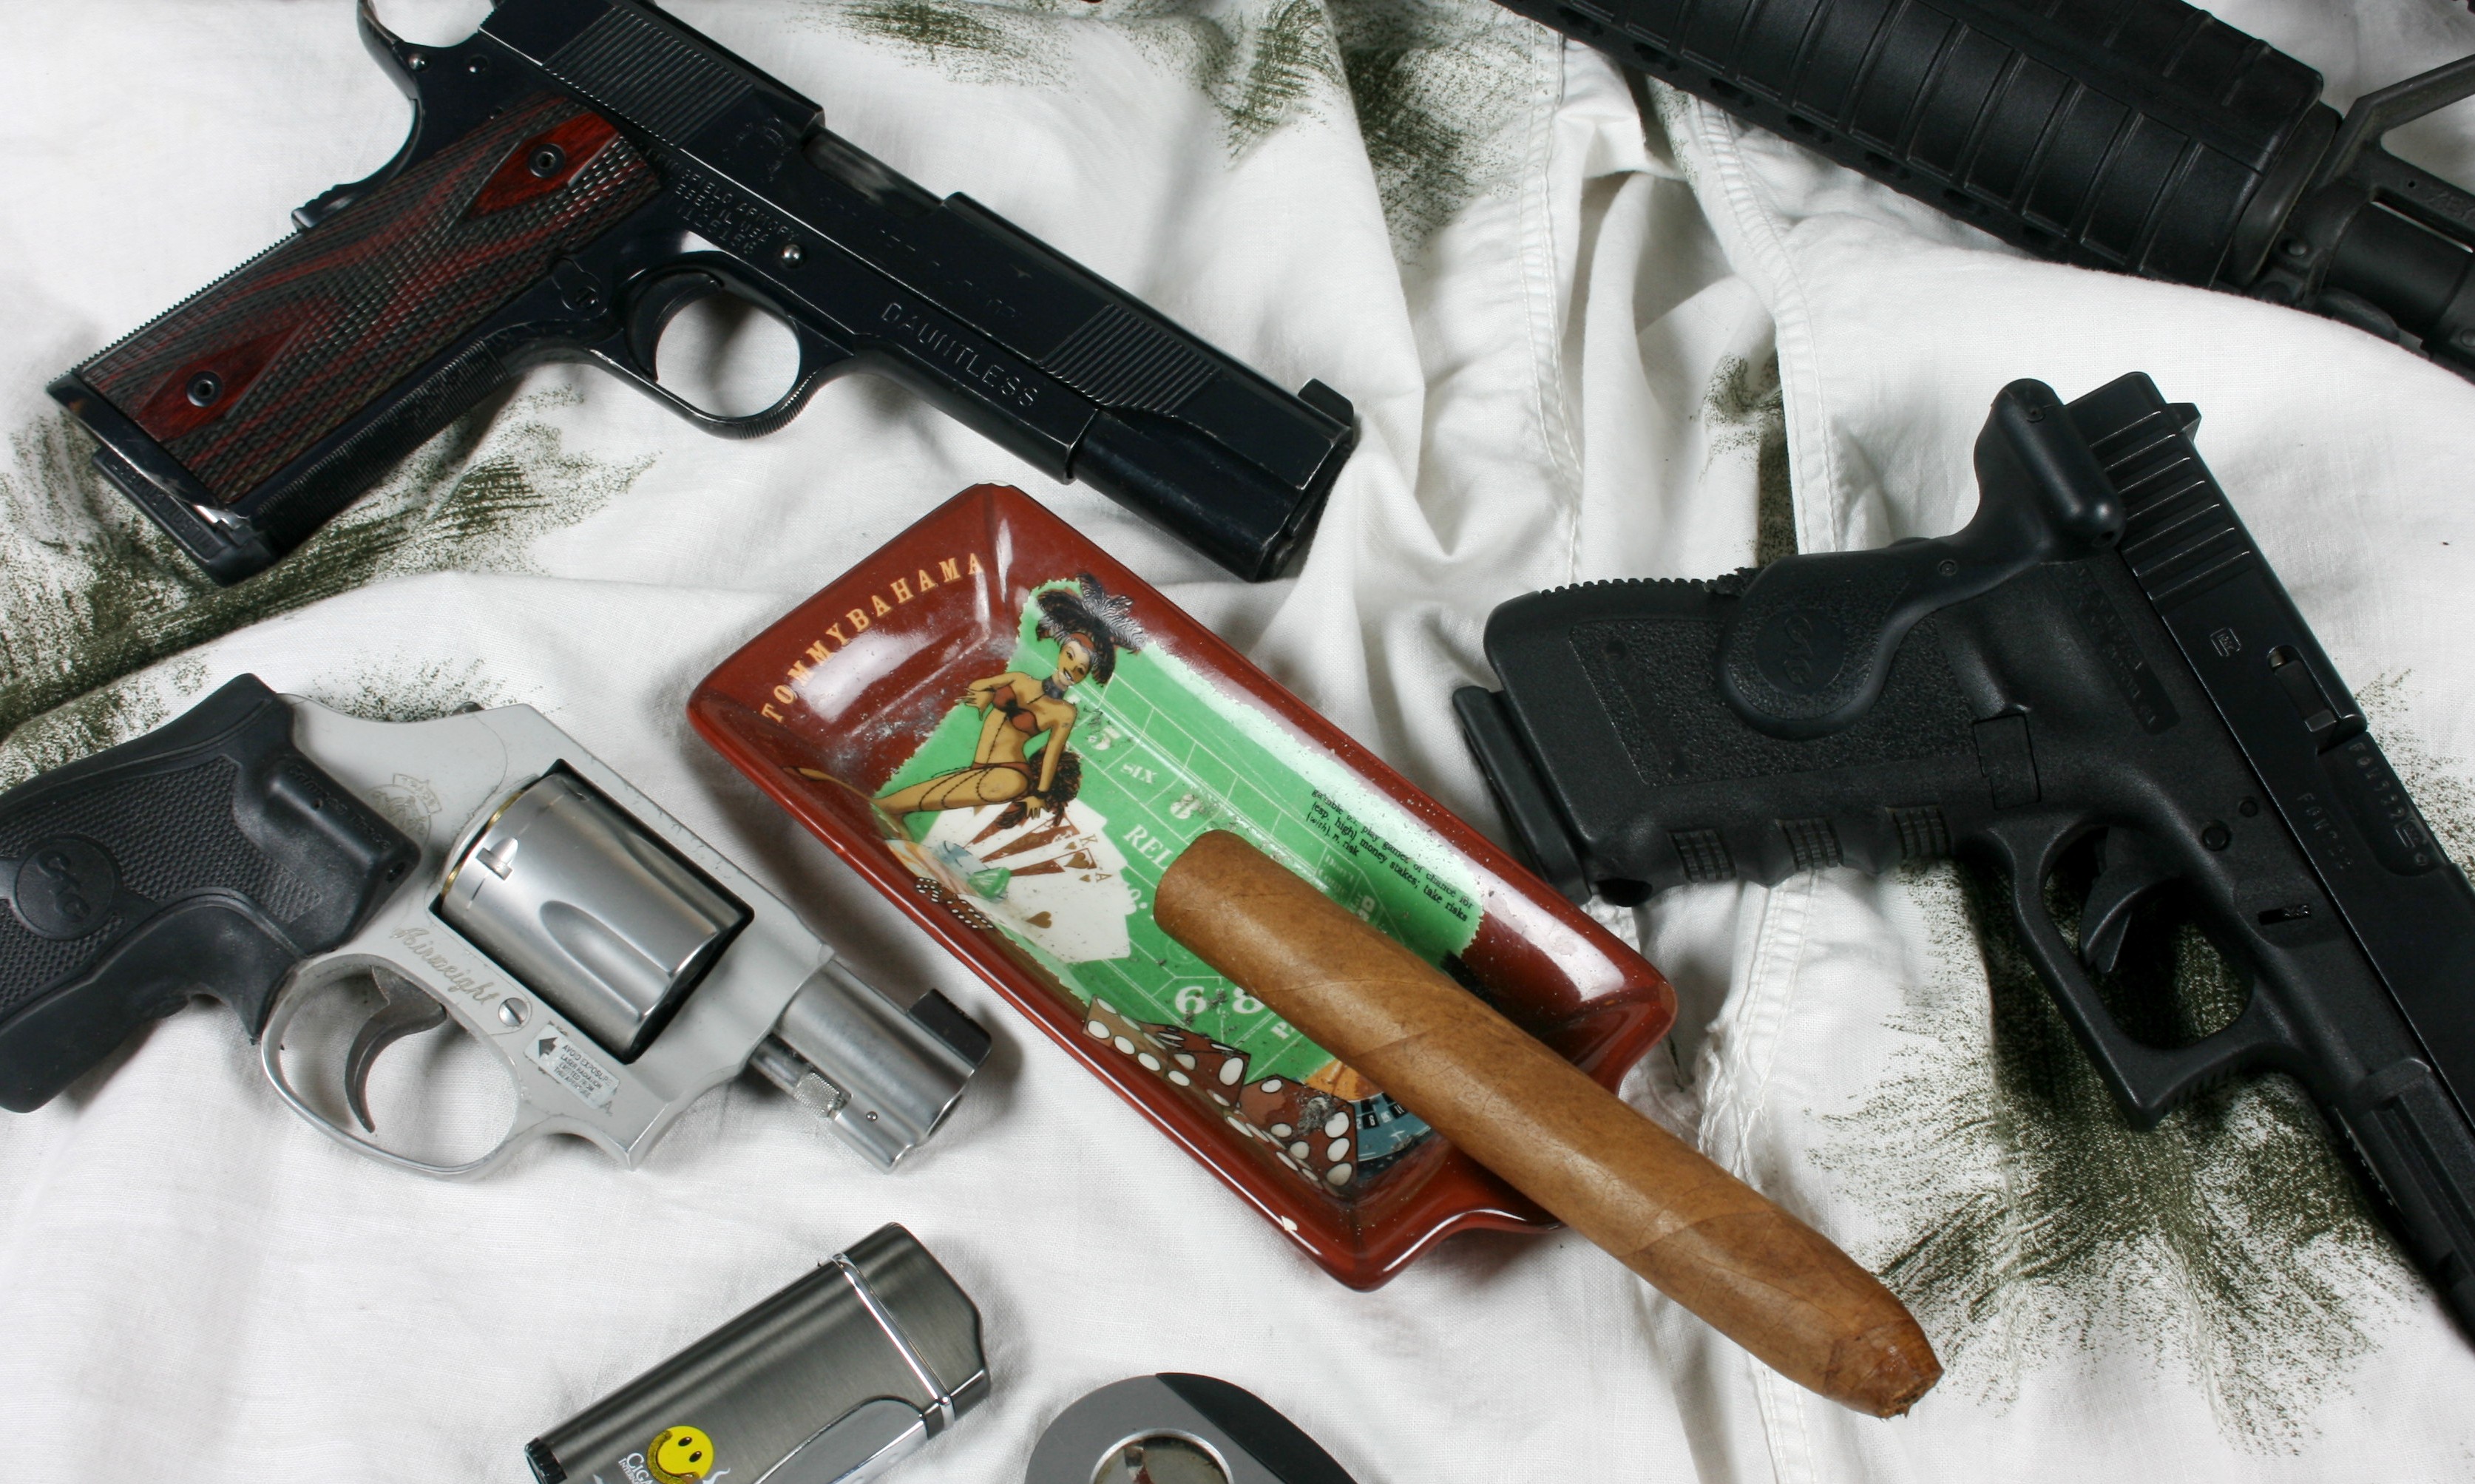 Gun and Cigars – Lets Strike a Match Up